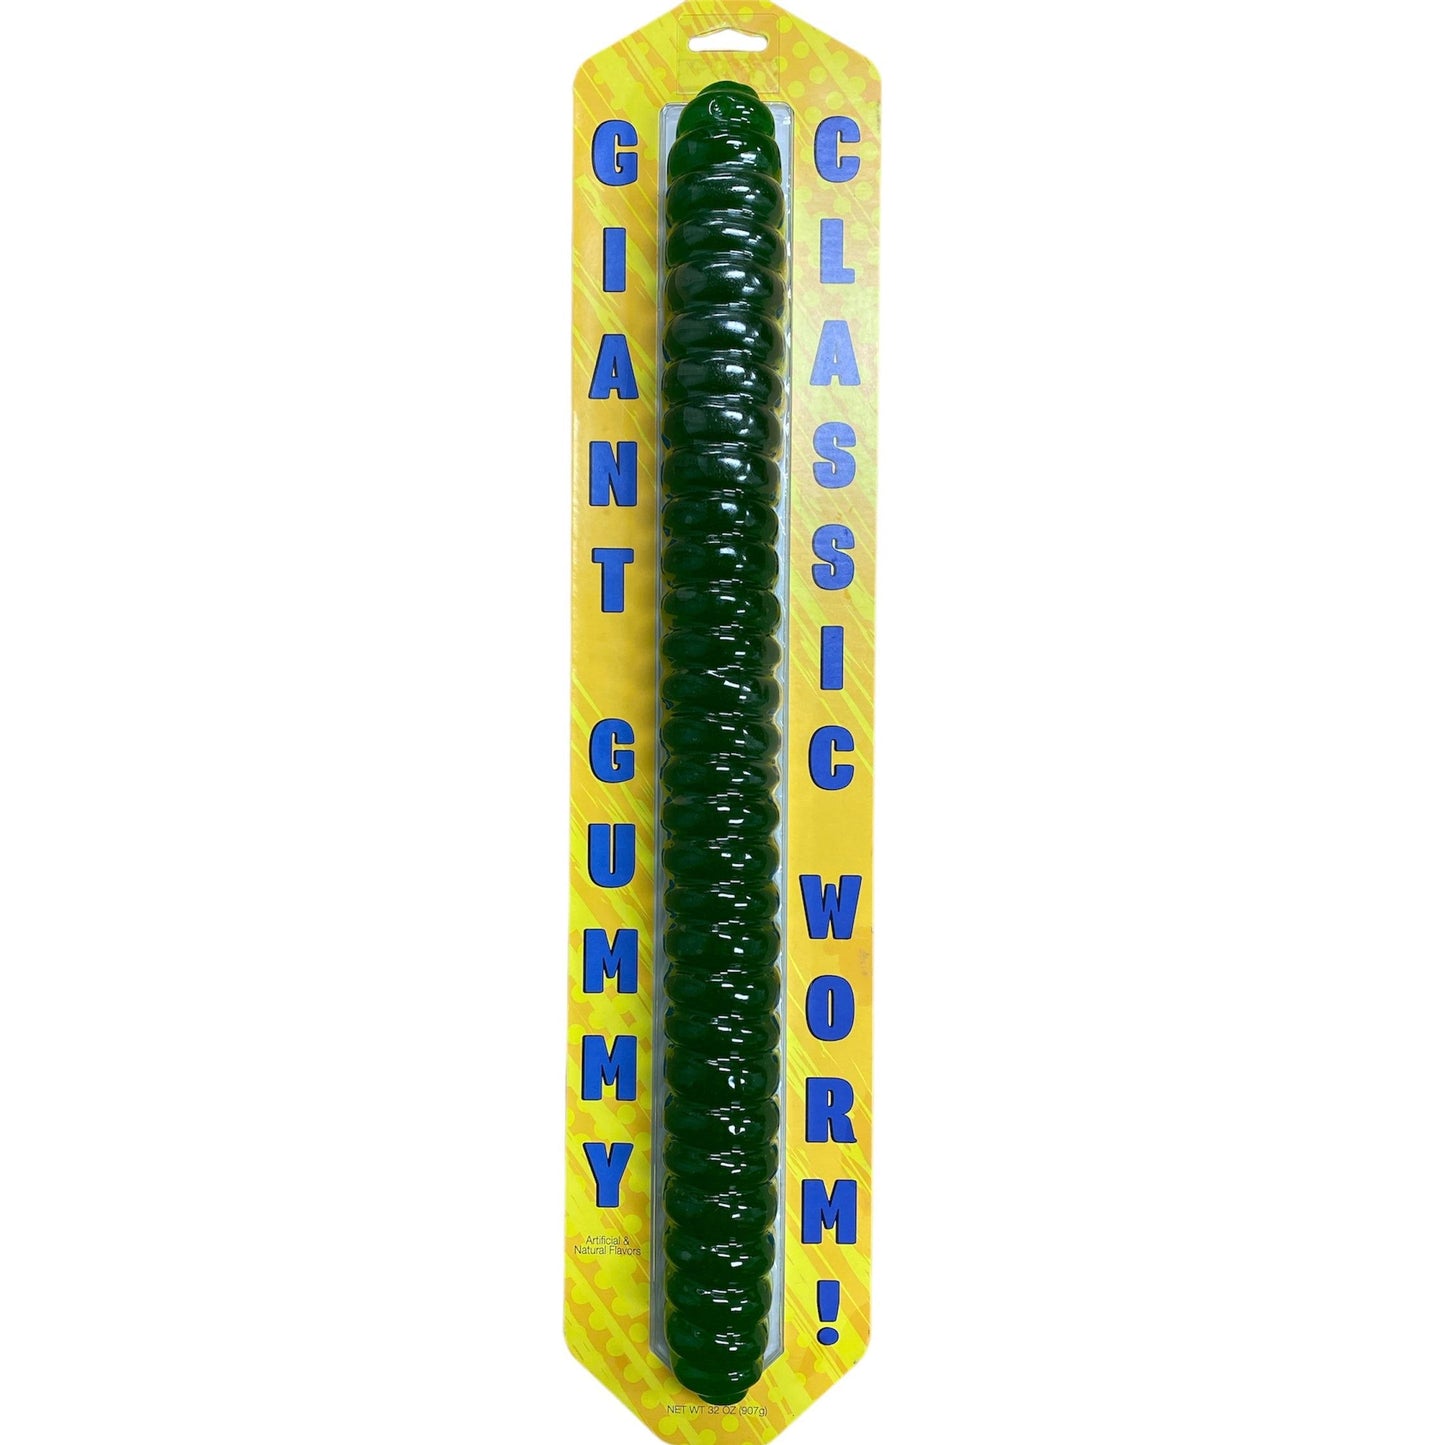 World's Largest Gummy Worm Sour Apple 26 Inches 2lb 1ct (NEW BLISTER PACKAGING)